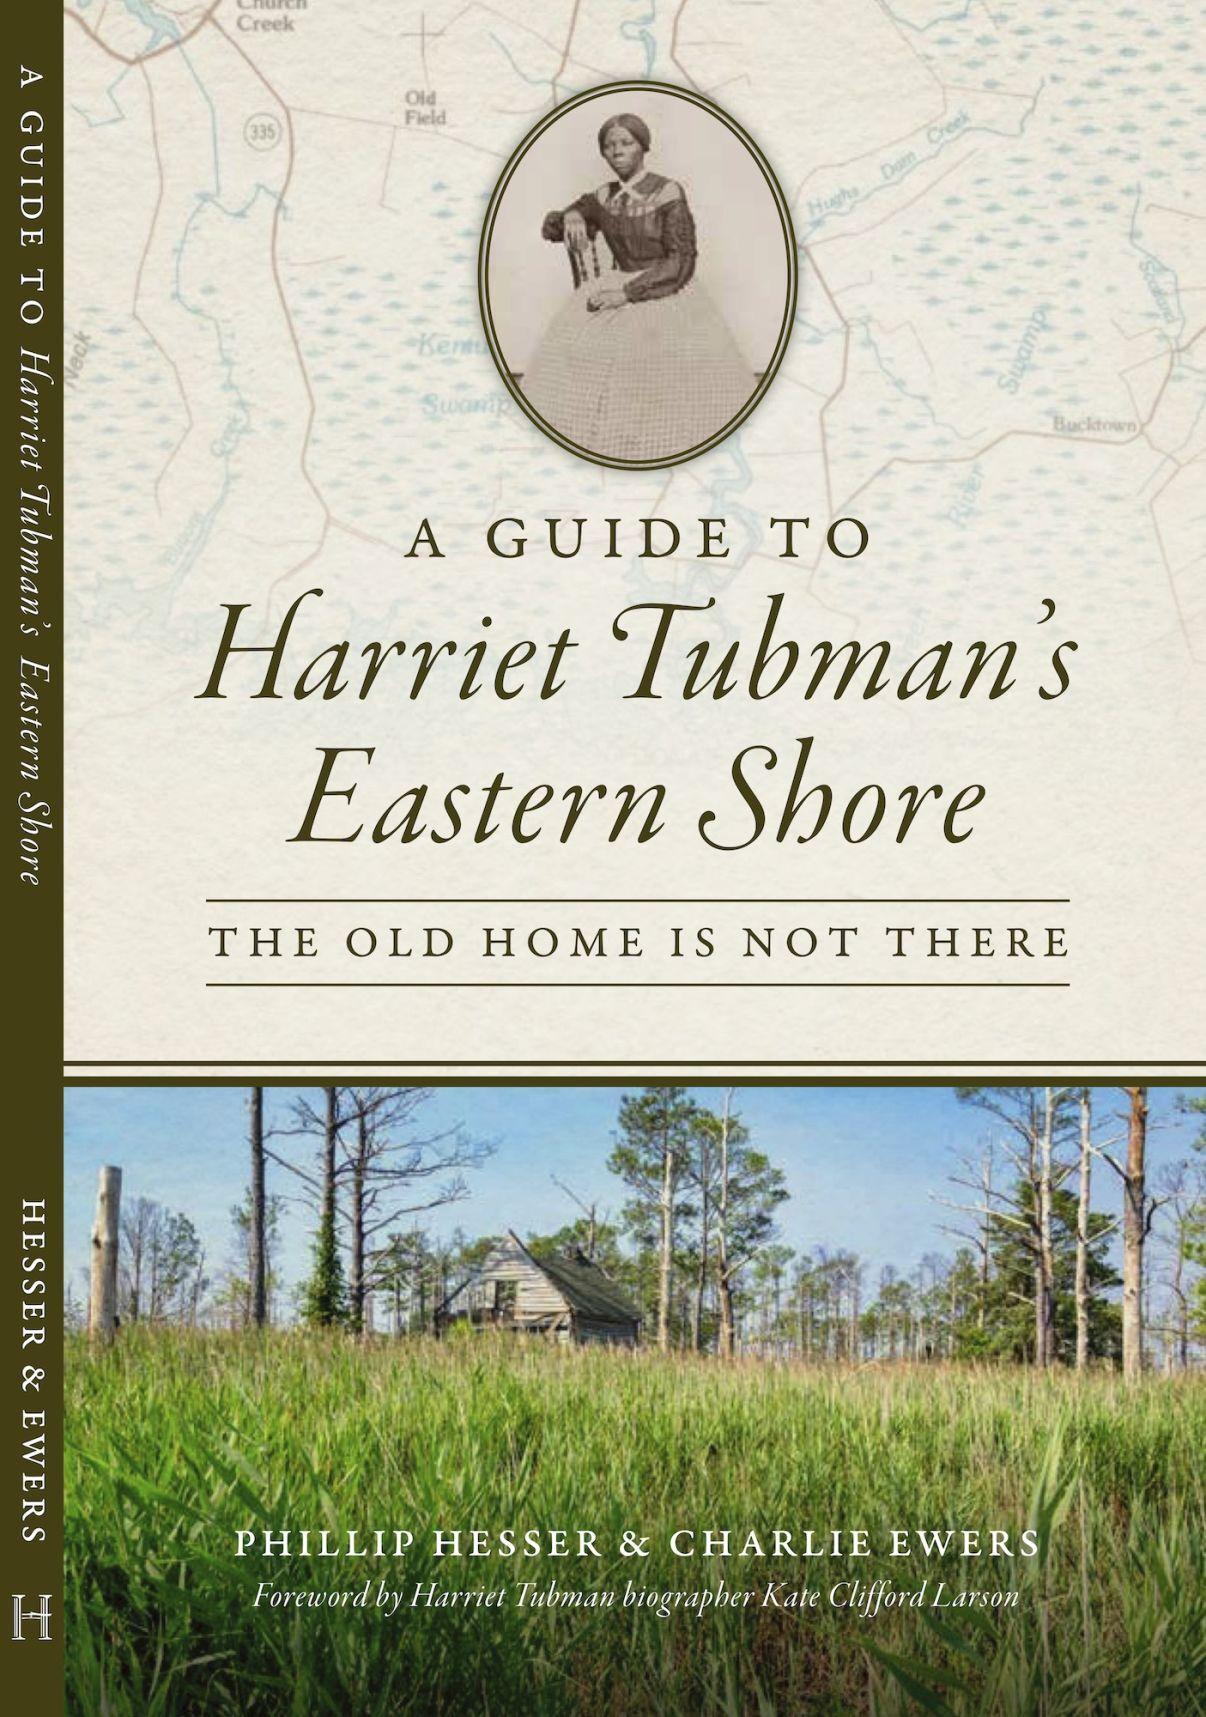 A Guide to Harriet Tubman's Eastern Shore - by Phil Hesser